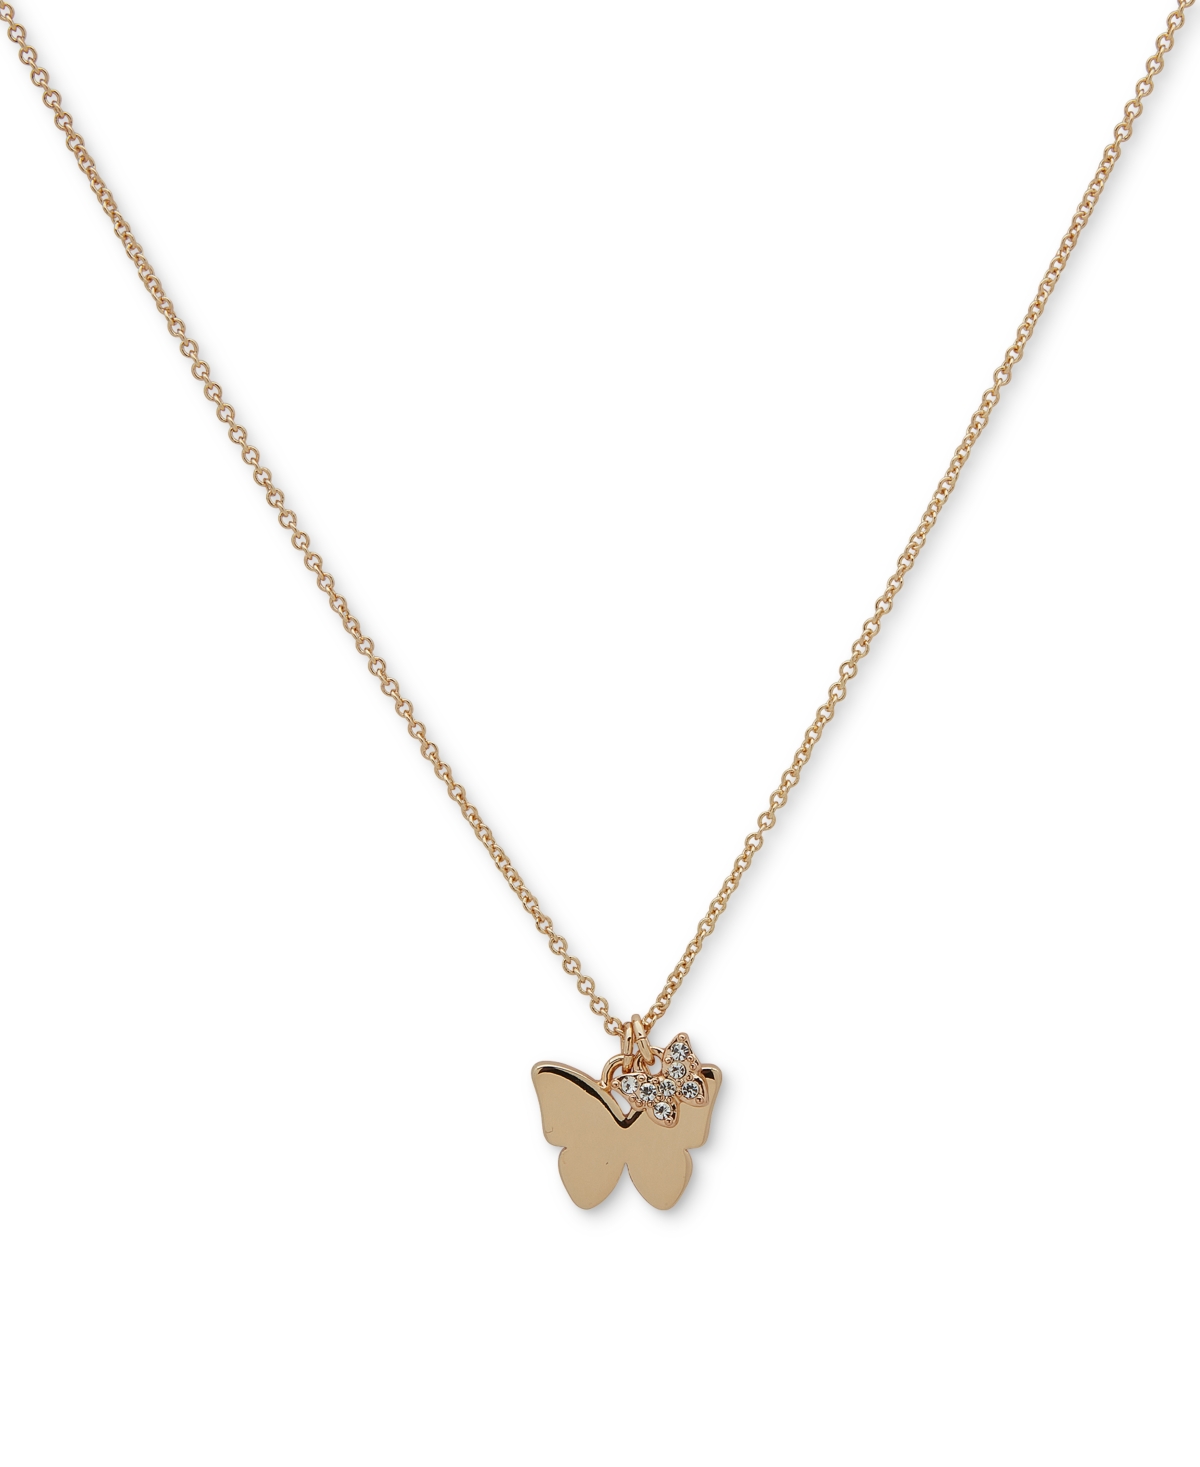 Gold-Tone Pave Butterfly Pendant Necklace, 16" + 3" extender - Crystal Wh